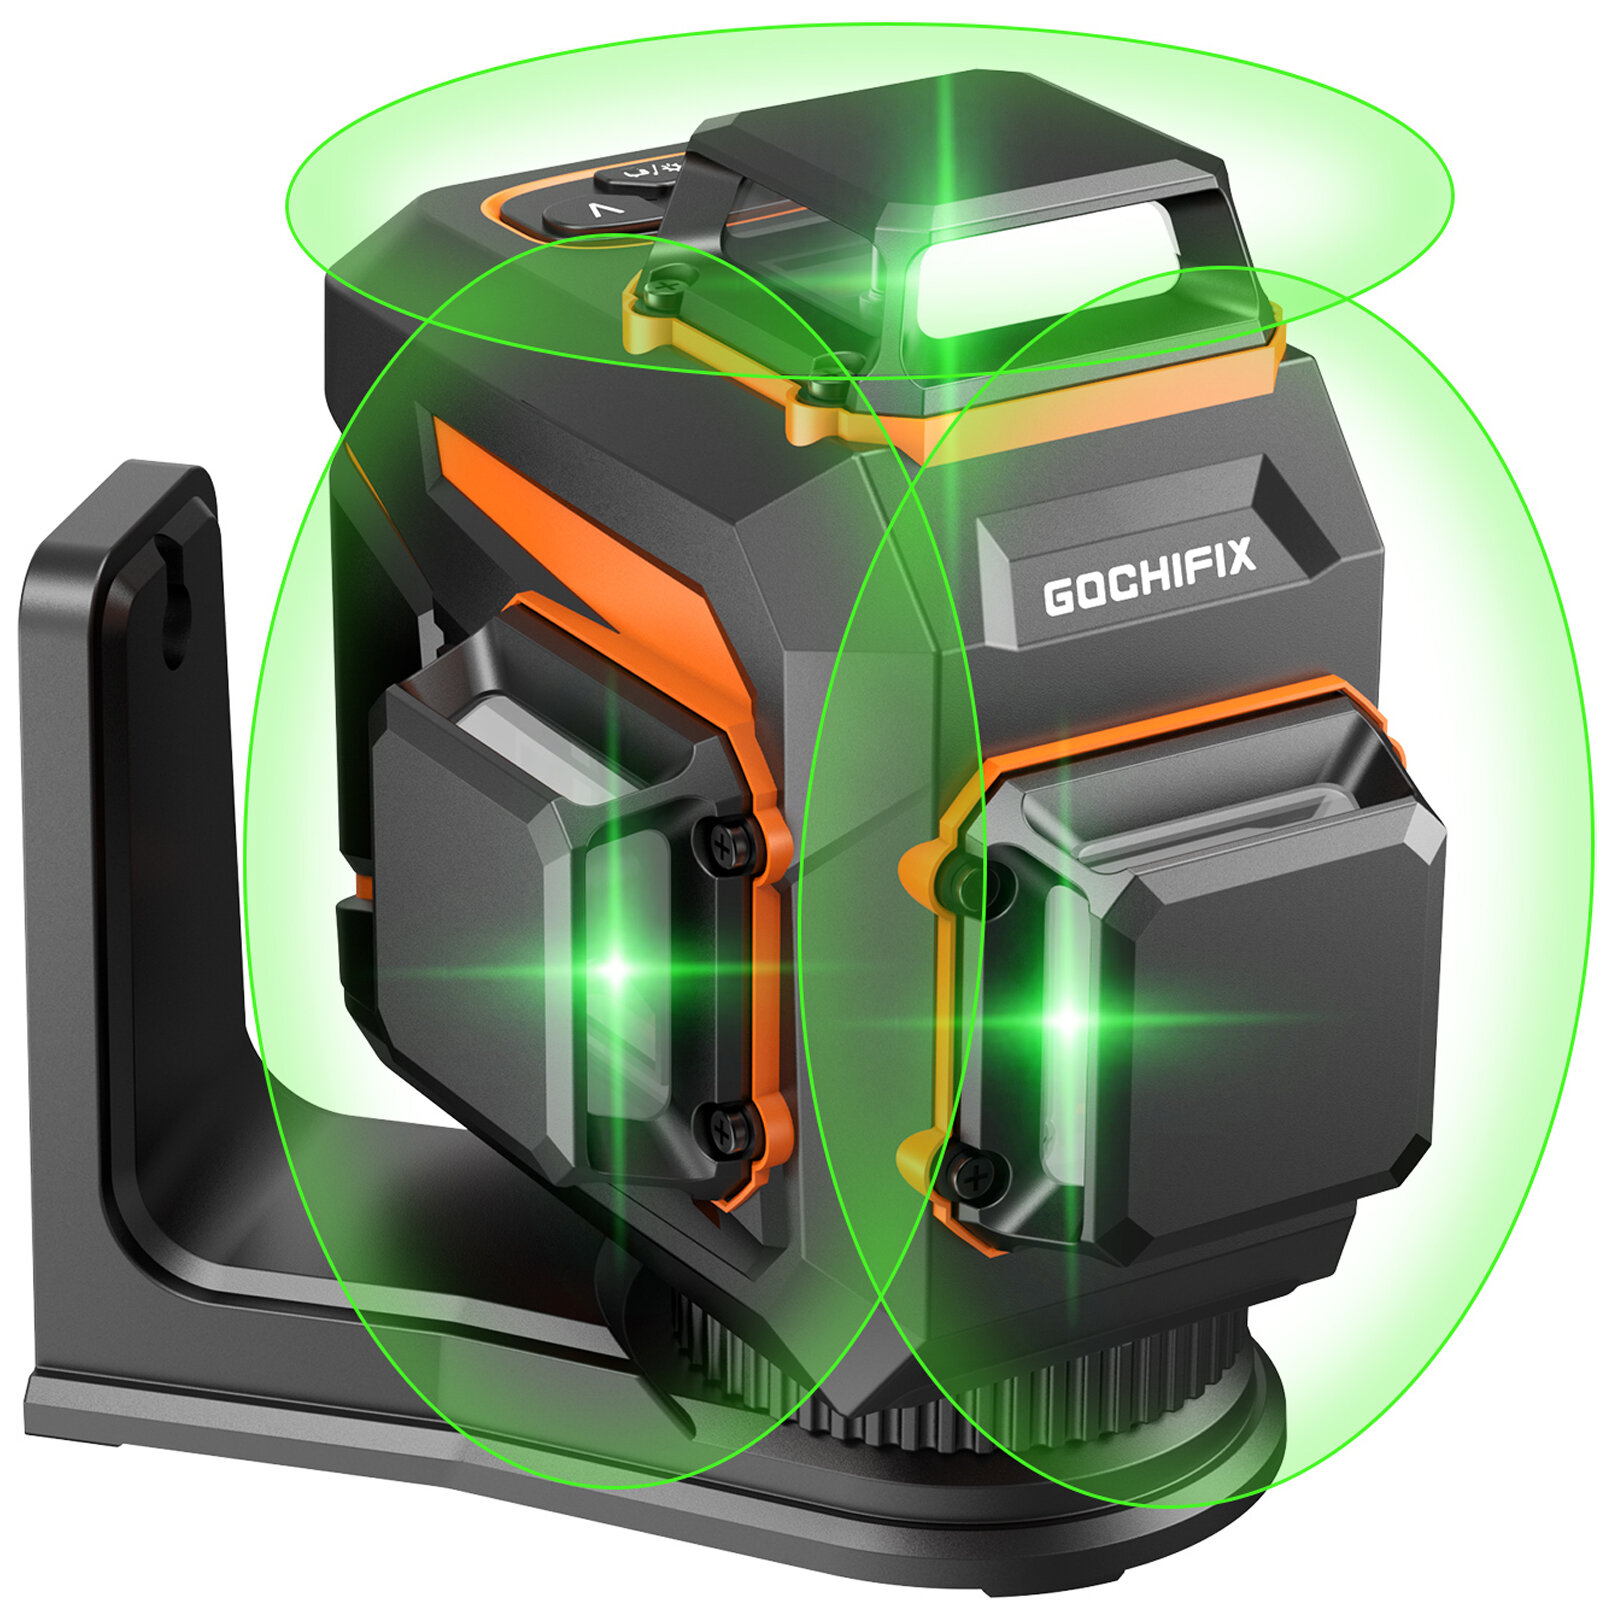 best price,gochifix,3x360,12,line,3d,self,leveling,green,laser,level,coupon,price,discount